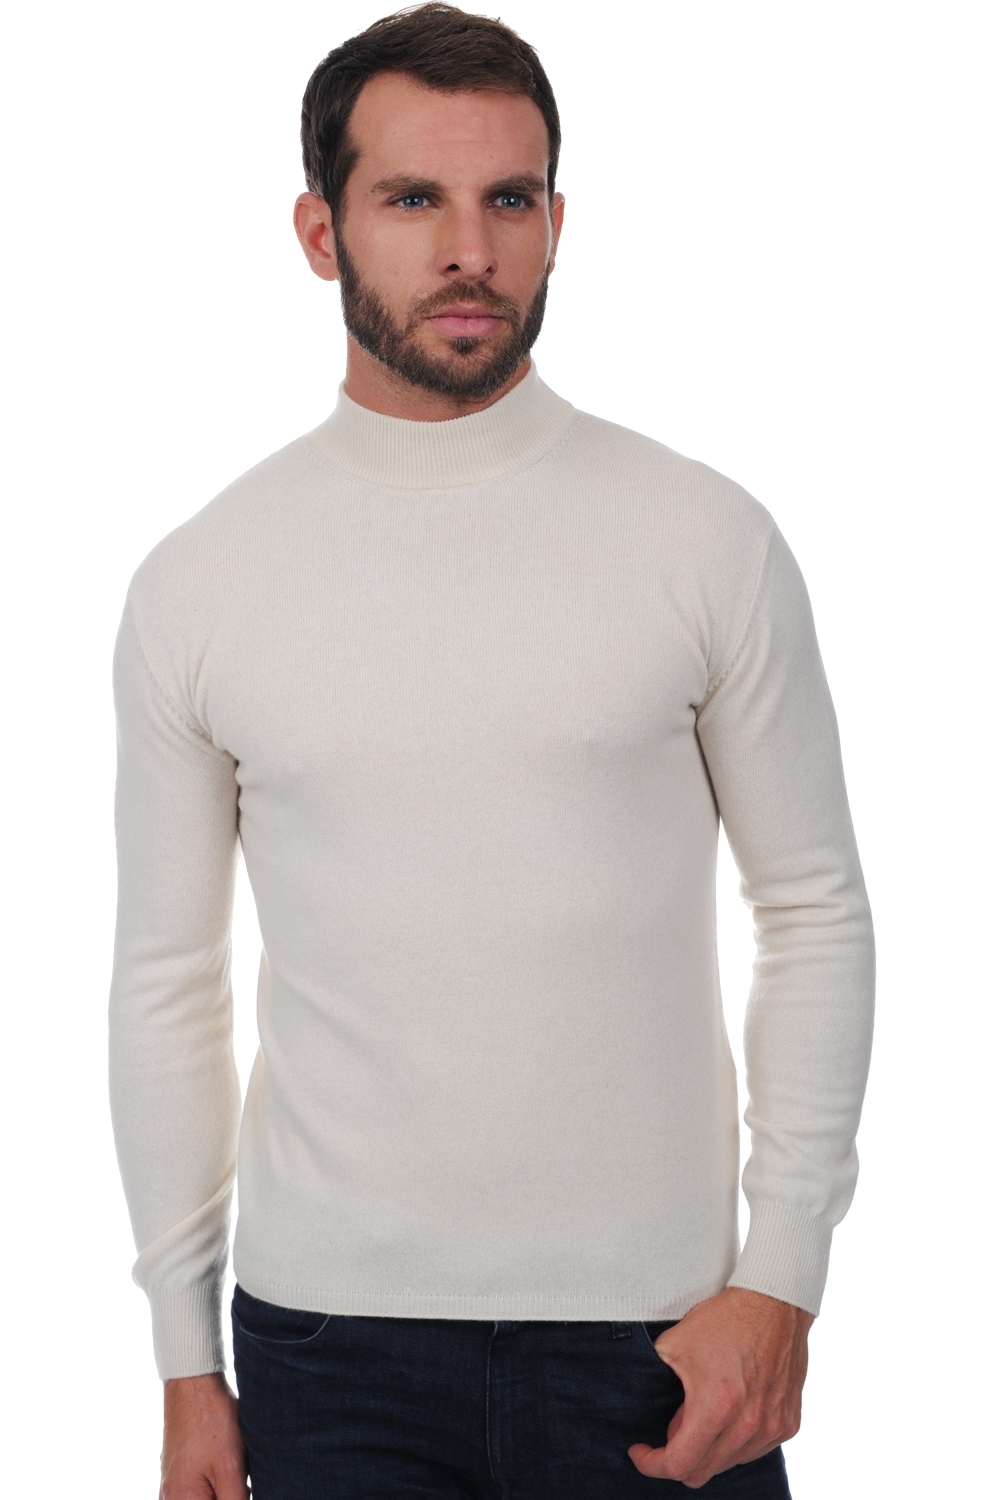 Cachemire pull homme frederic natural ecru 4xl